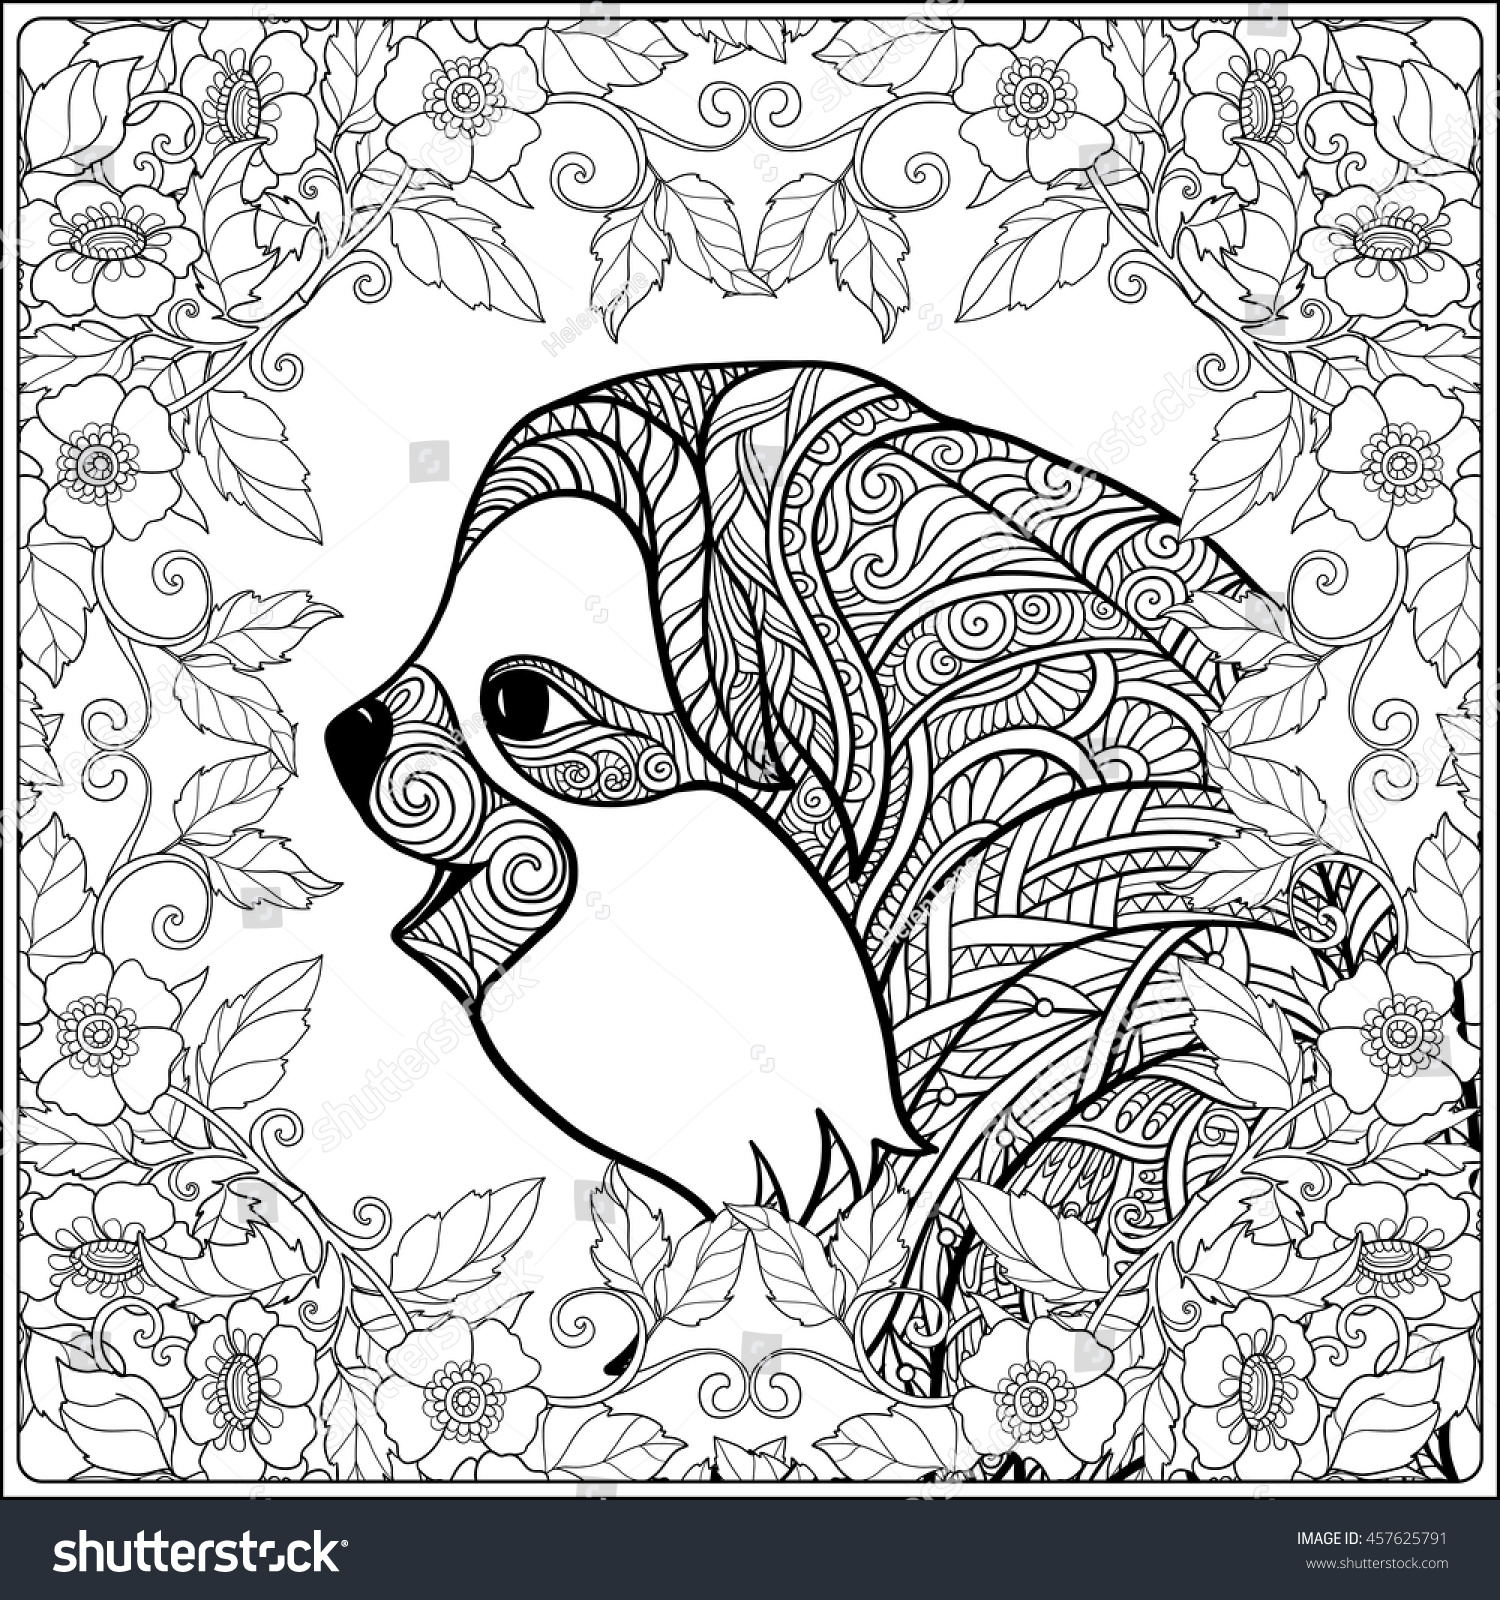 Three Toed Sloth Coloring Pages at GetDrawings | Free download